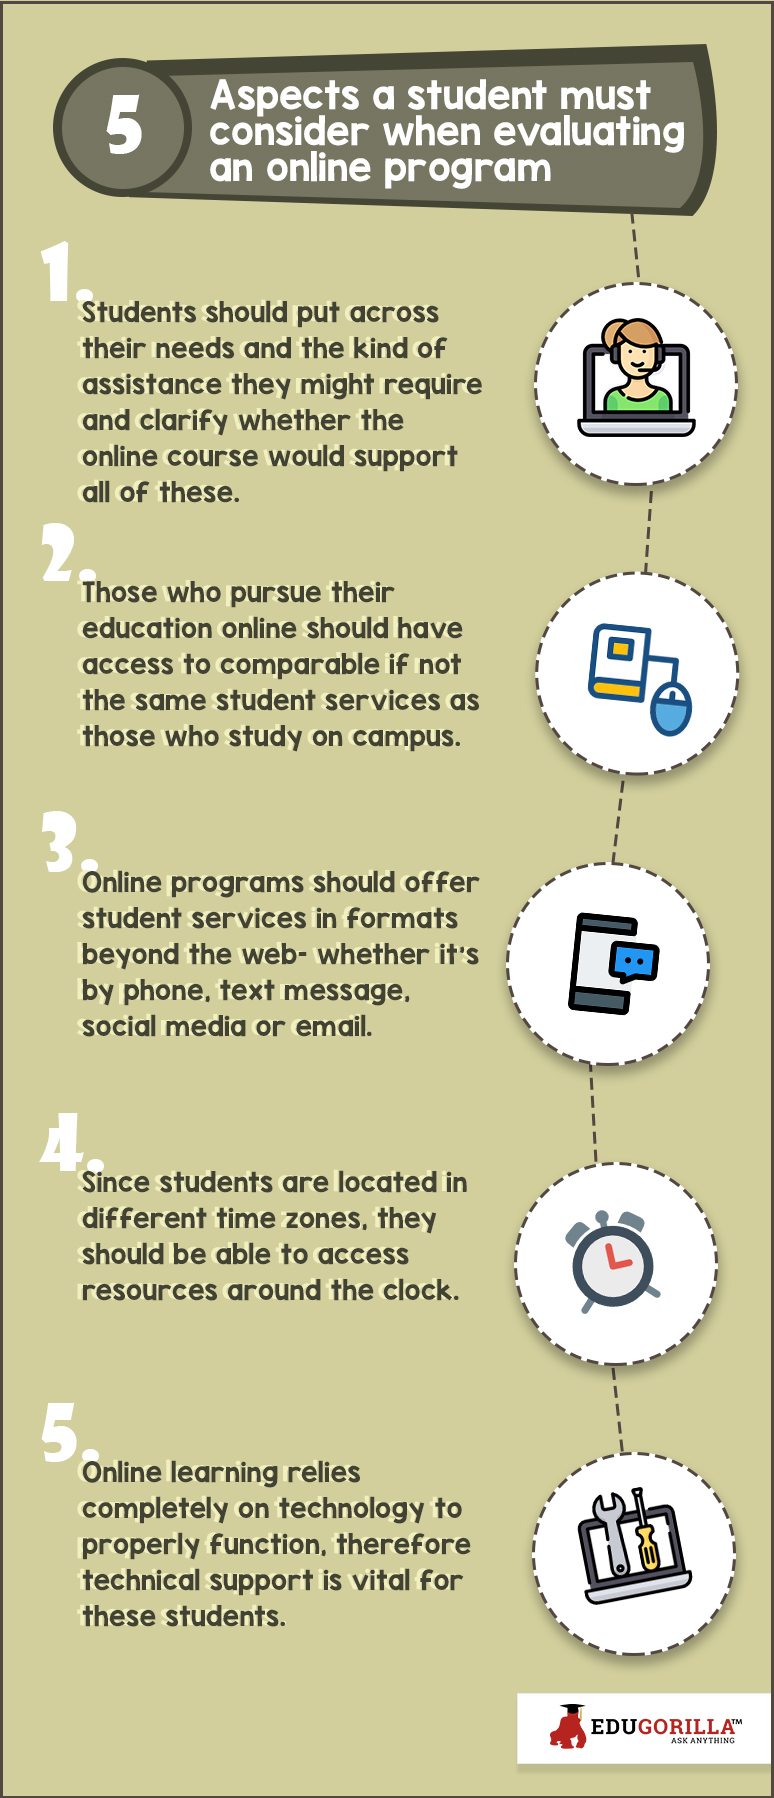 5 Aspects a student must consider when evaluating an online program